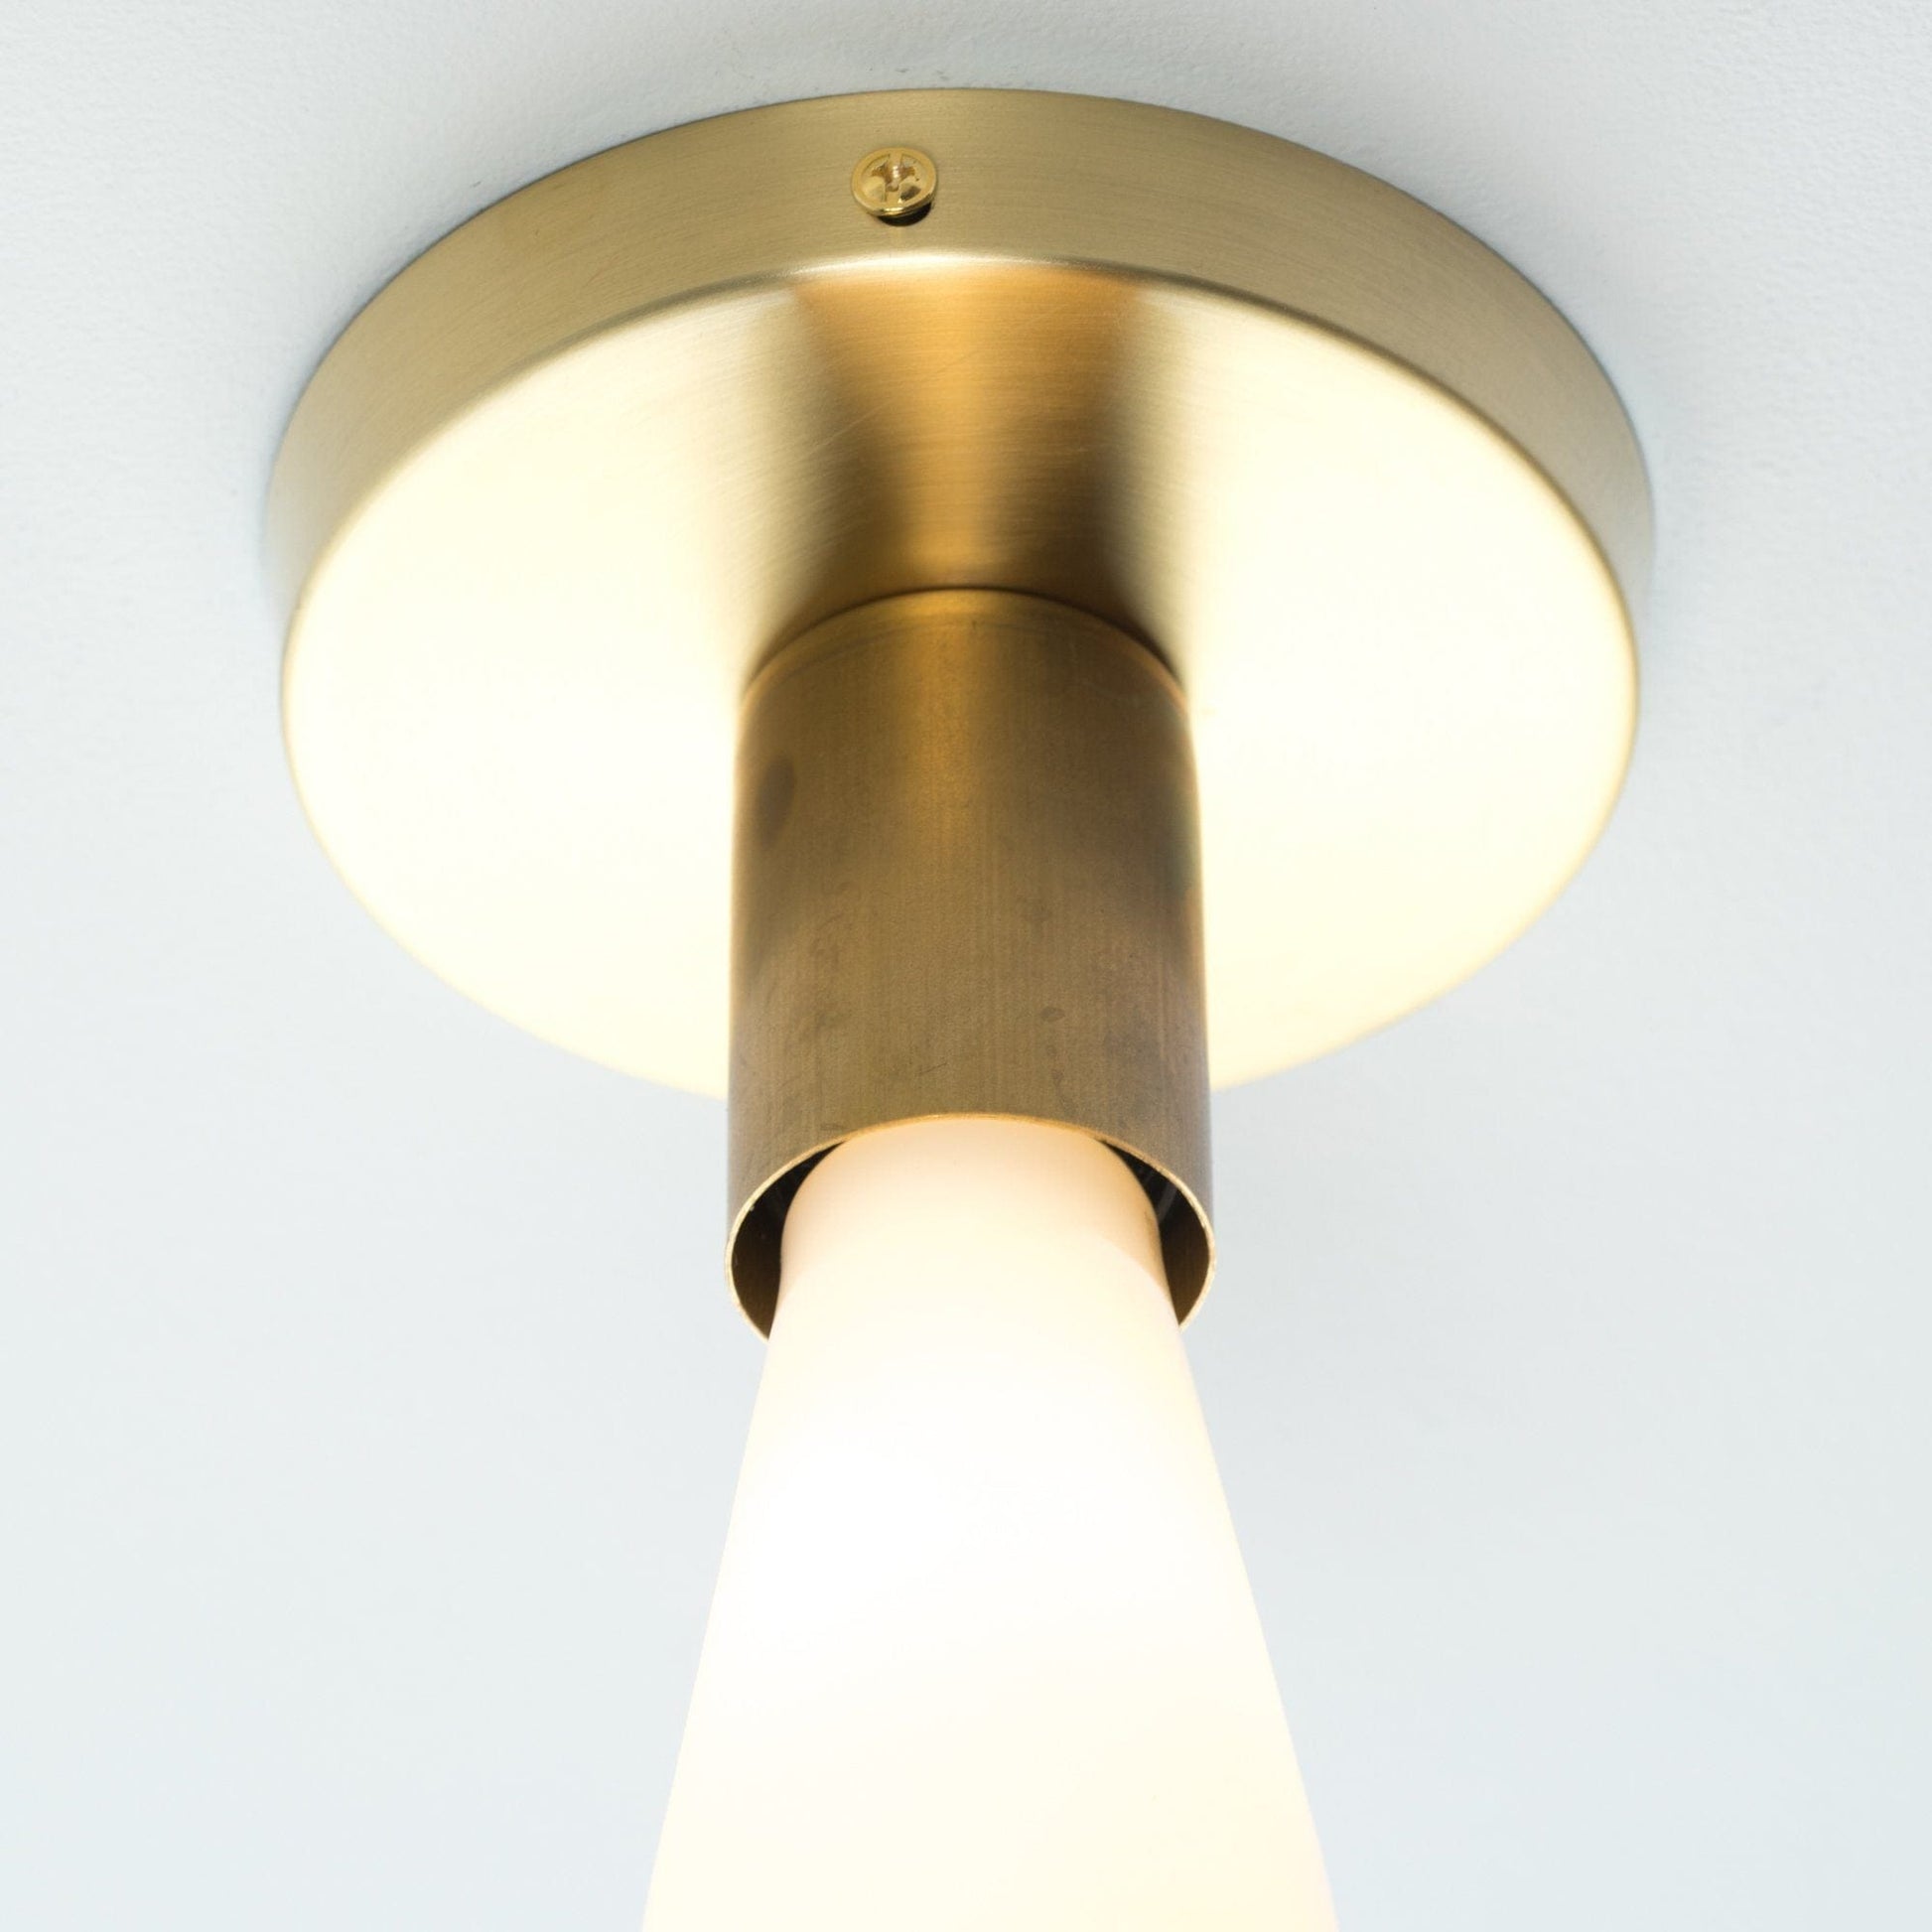 Close Up photo of Button Light in Raw Brass finish. Pictured with an Edison milk glass light bulb